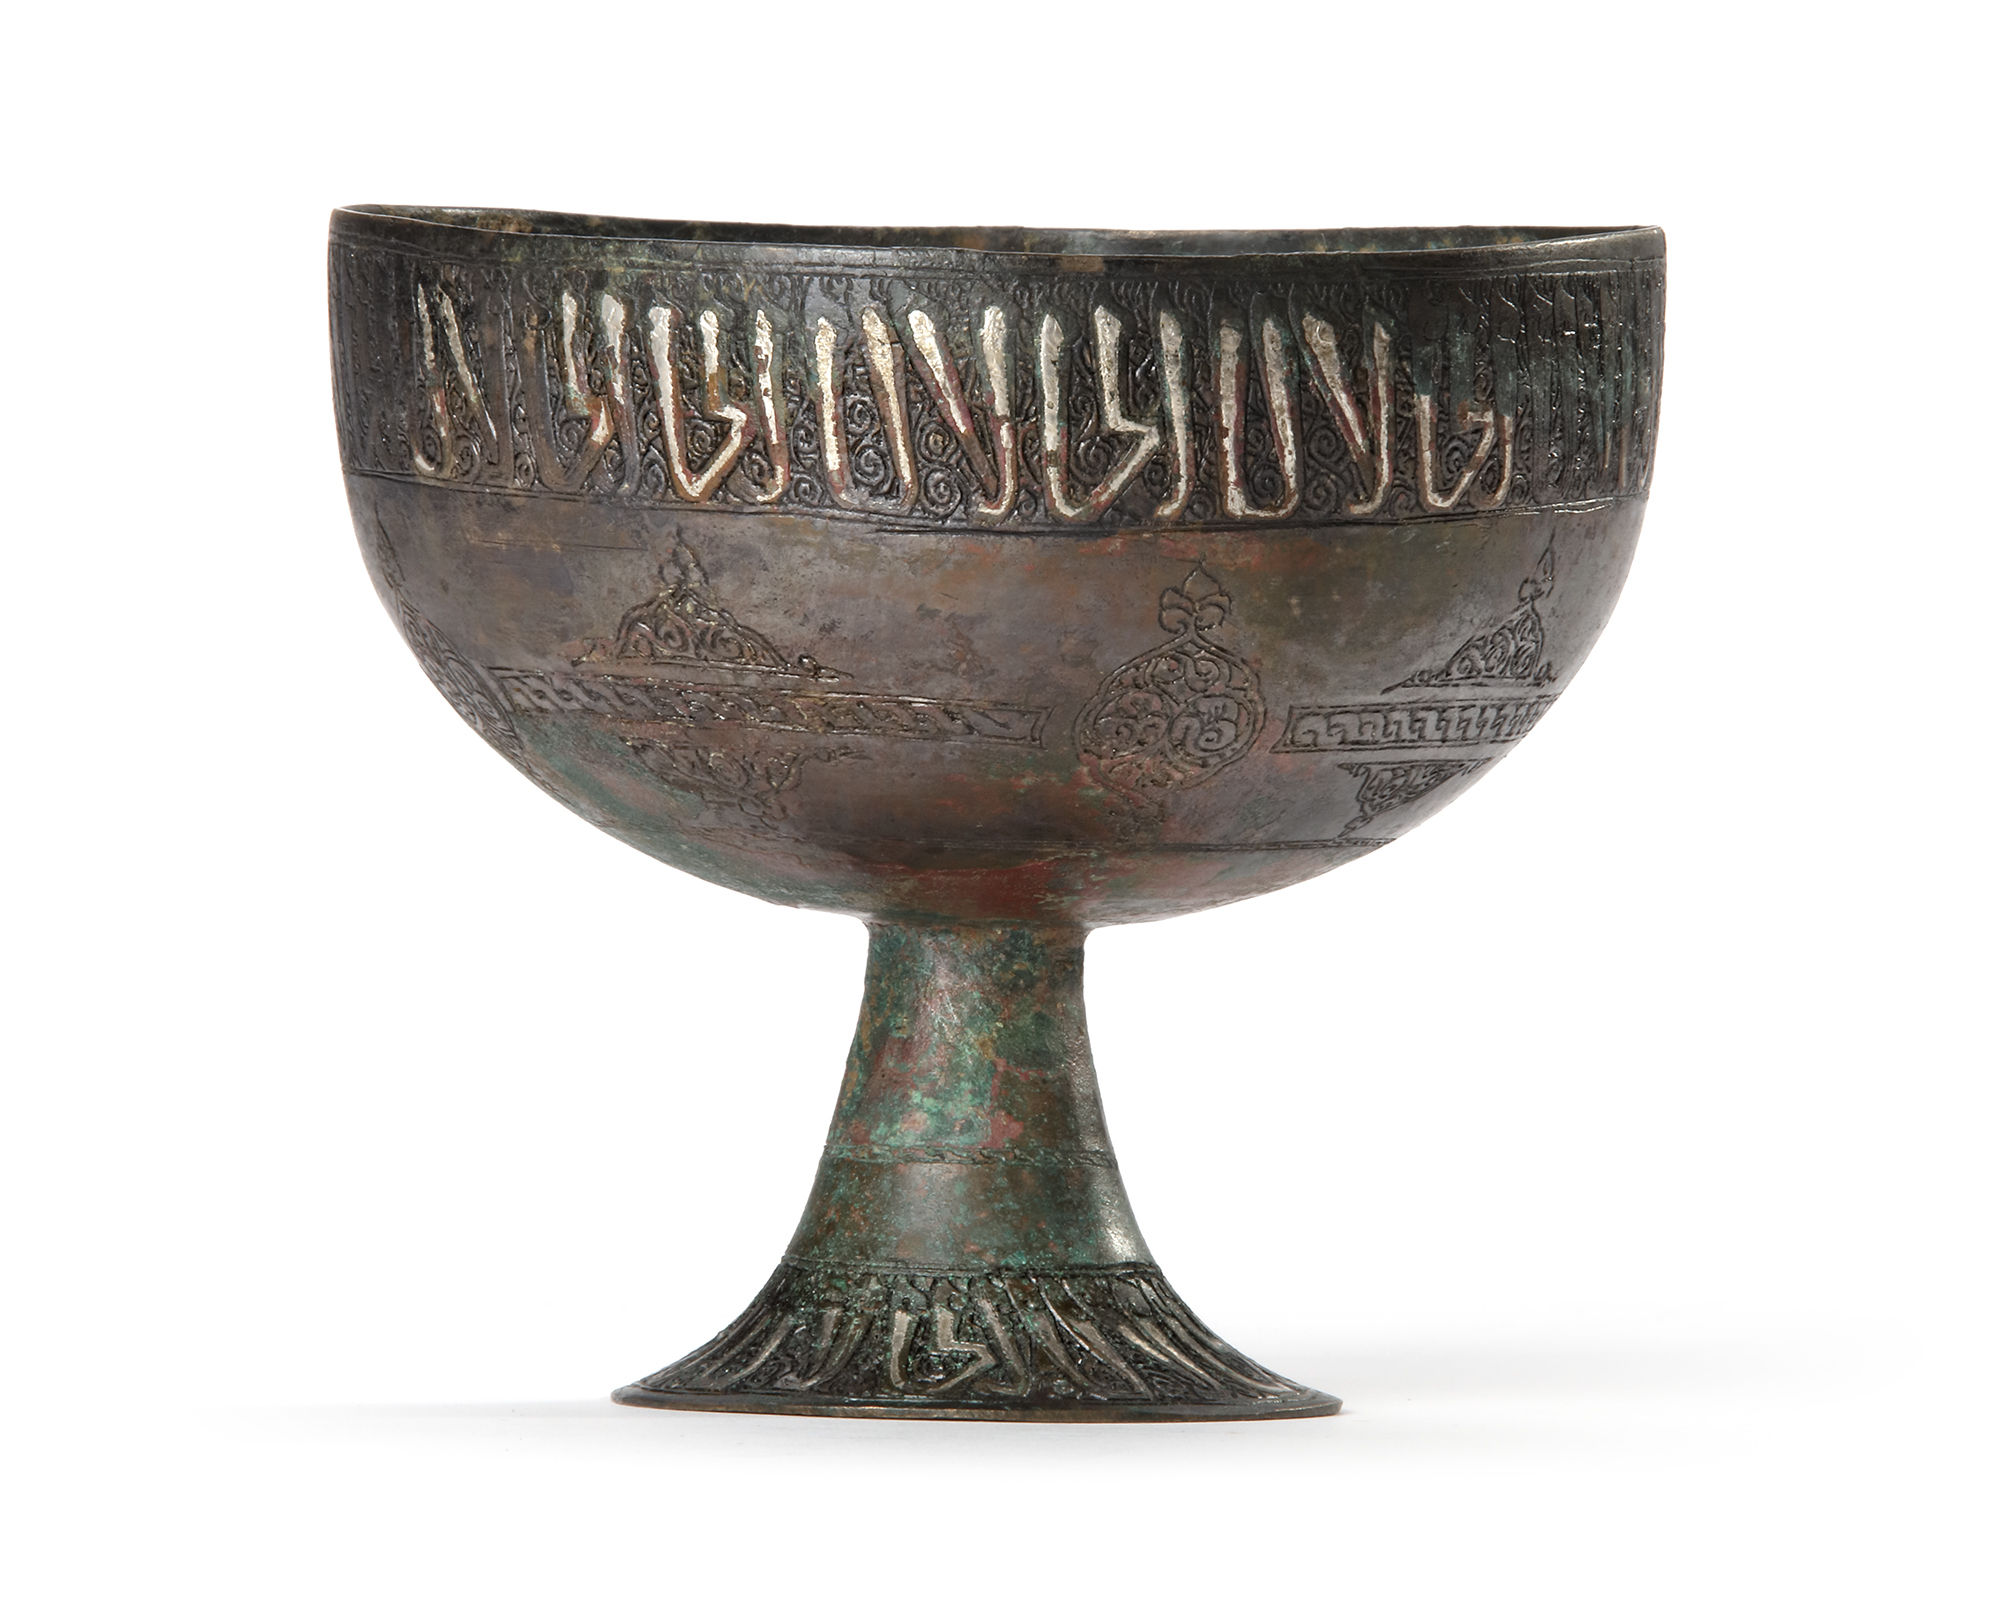 A SILVER-INLAID BRONZE FOOTED BOWL, PERSIA KHORASSAN, 12TH-13TH CENTURY - Image 2 of 6